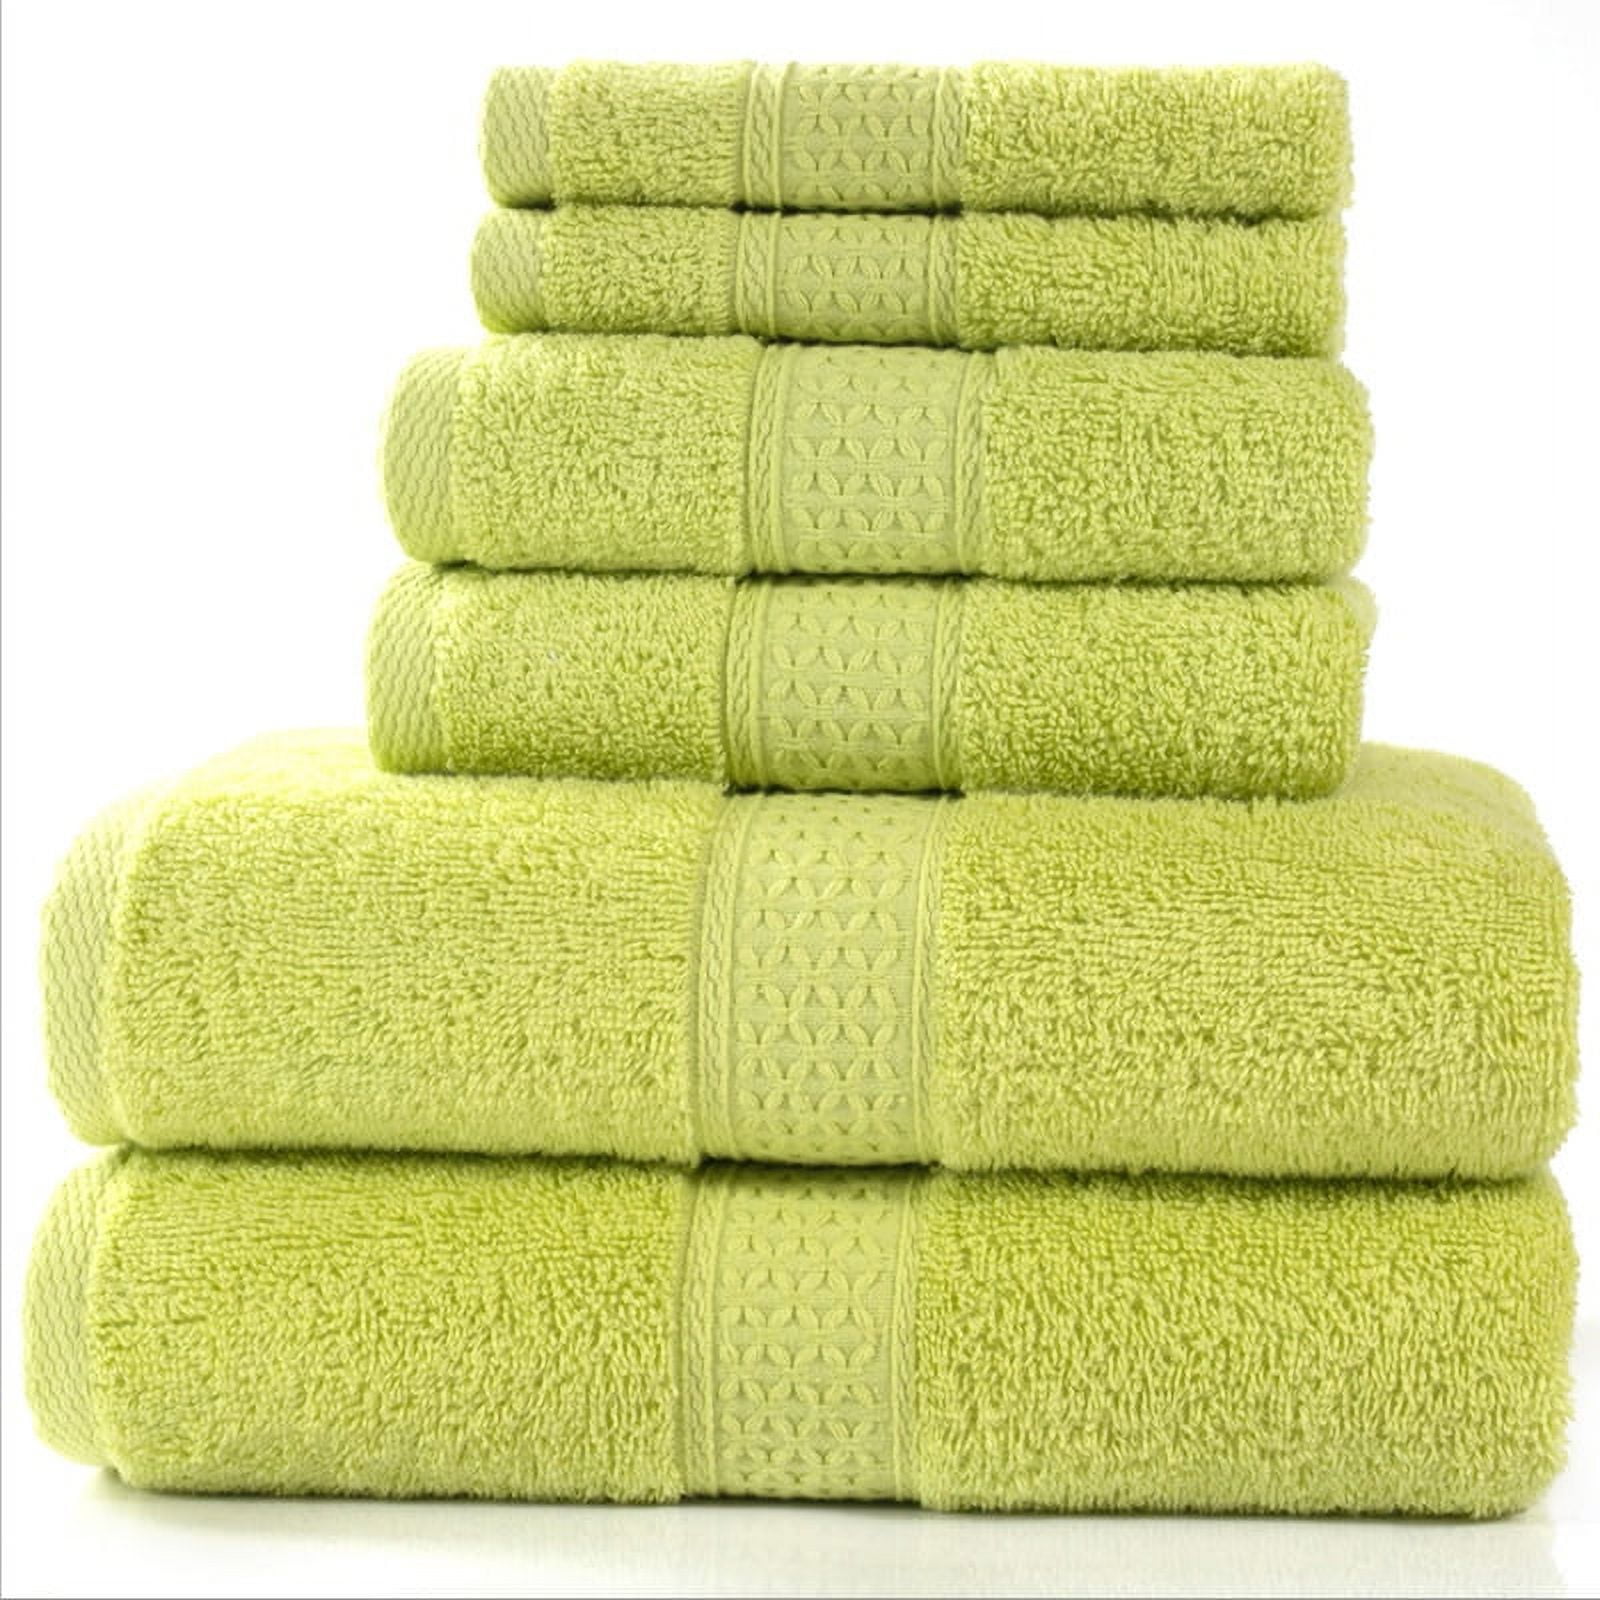 Chakir Turkish Linens Hotel & Spa Quality, Highly Absorbent Towel Set (Set of 8, Moss)